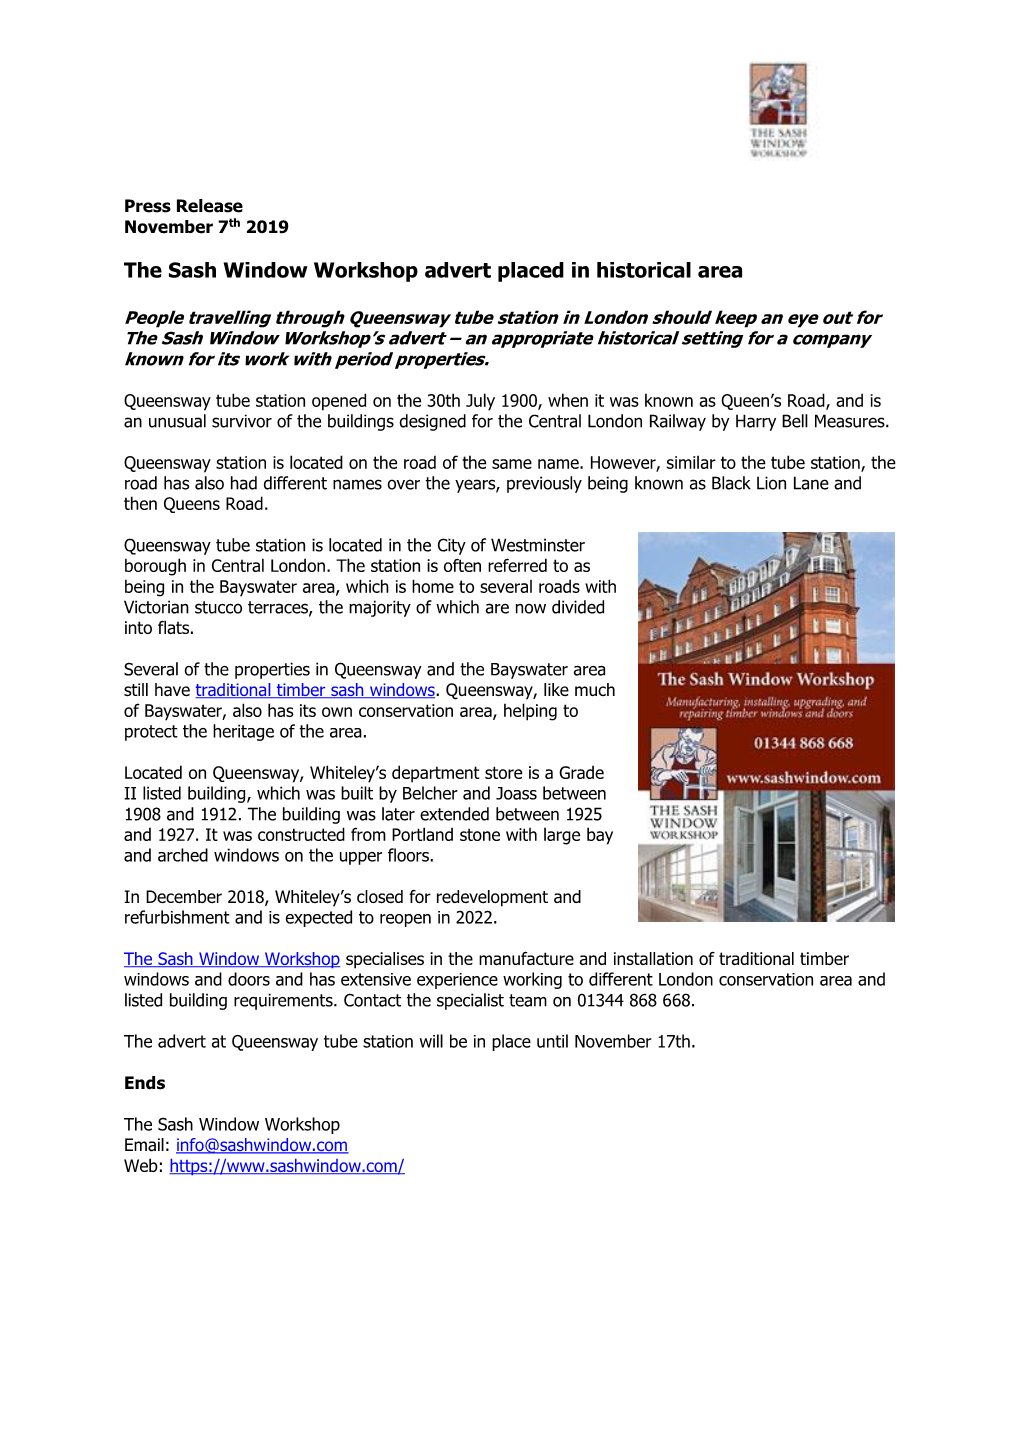 The Sash Window Workshop Advert Placed in Historical Area